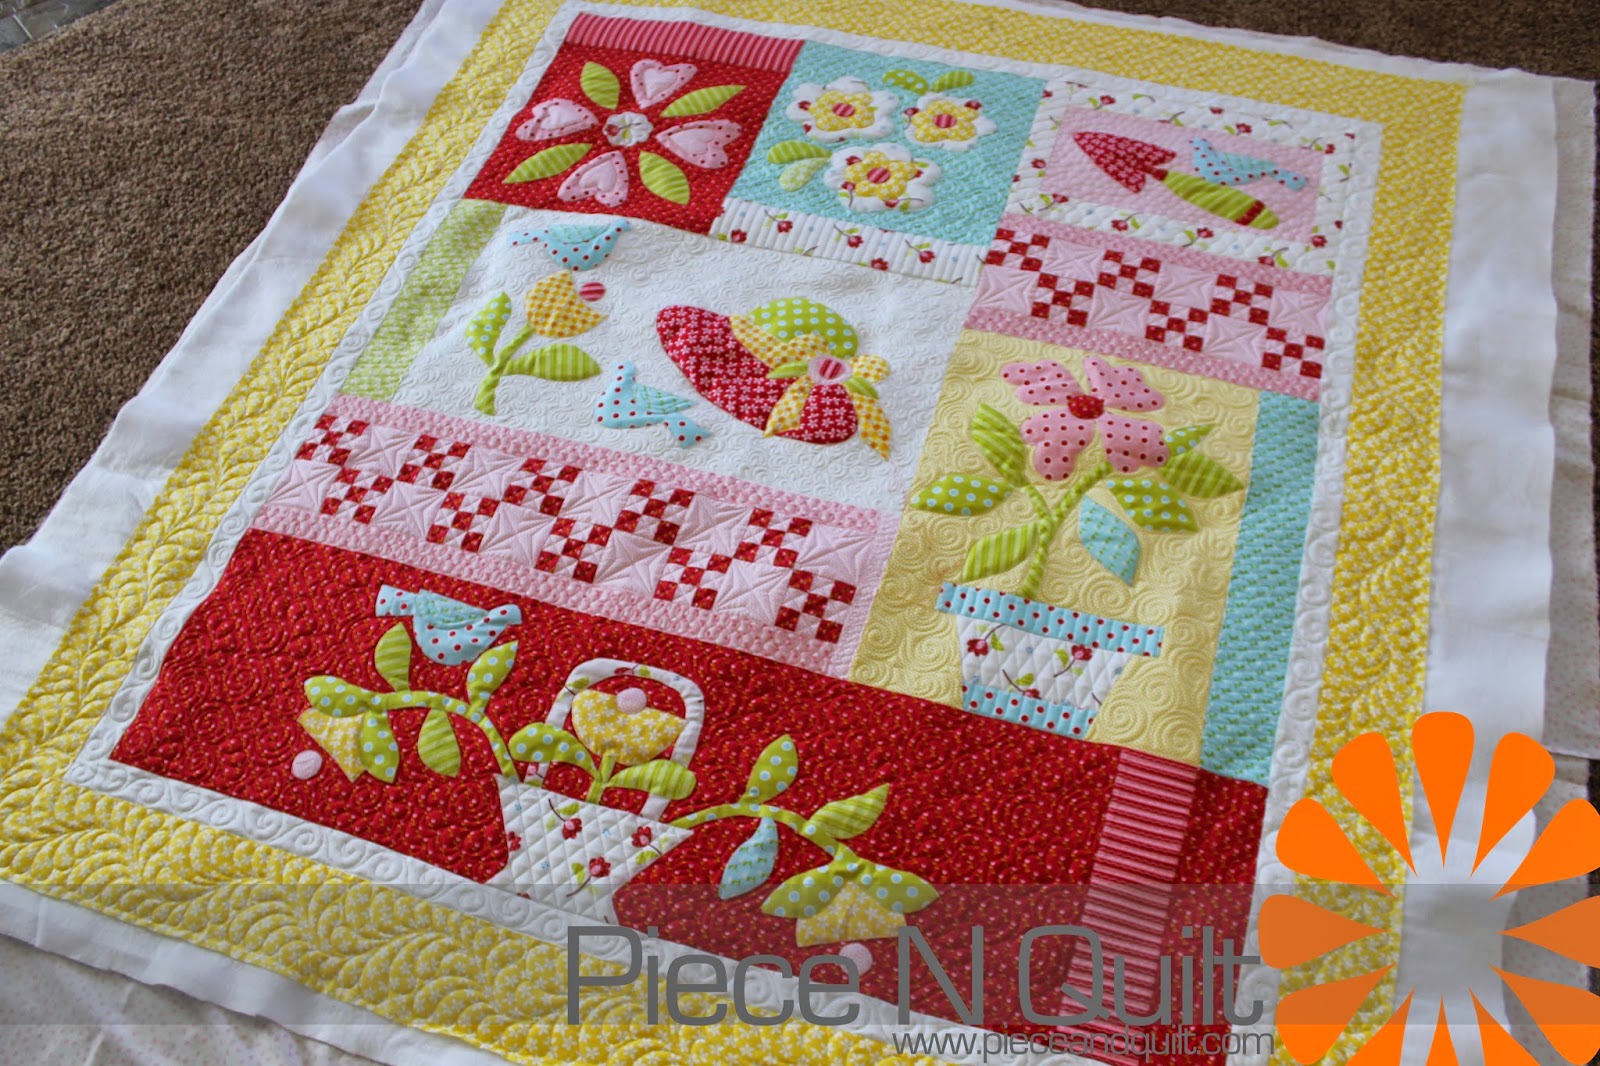 Projects by Jane: Raw edge applique